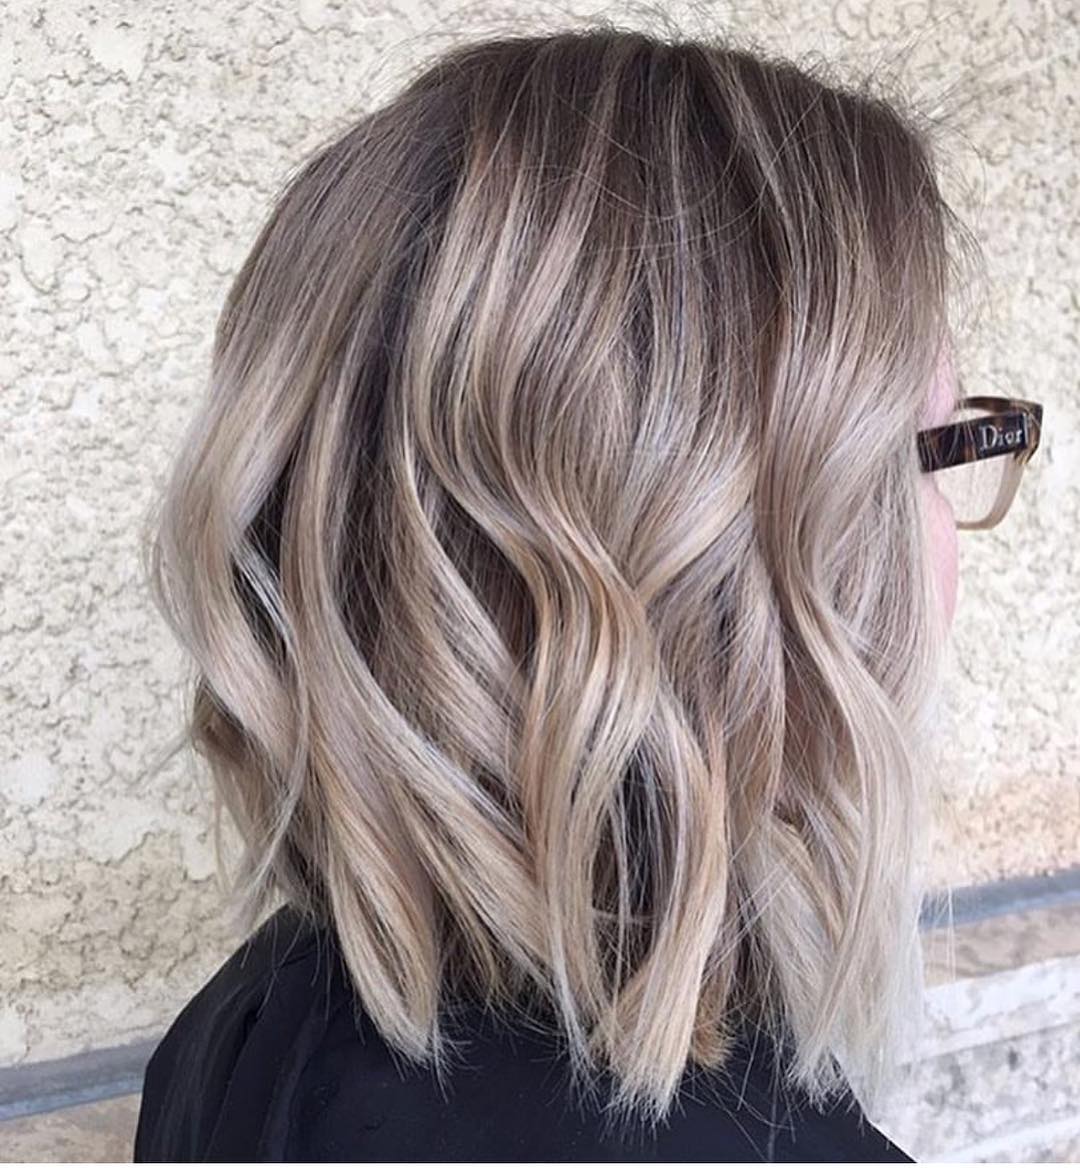 10 Balayage Ombre Hair Styles for Shoulder Length Hair ...